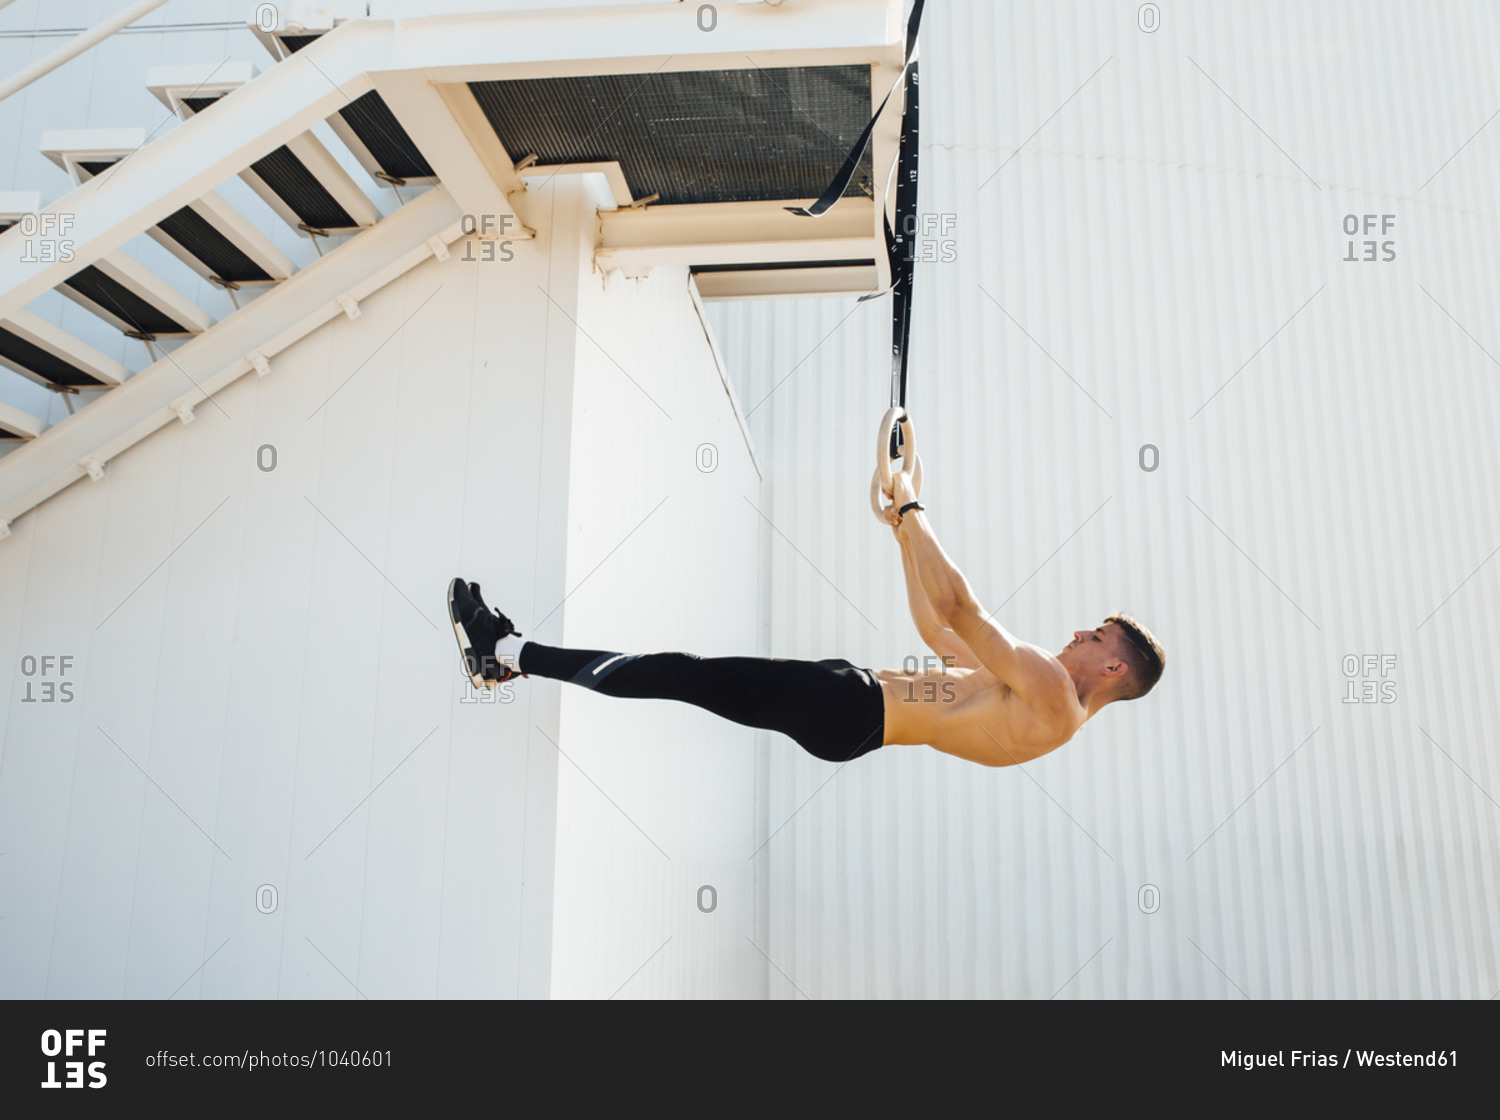 Athlete balancing body weight while hanging on ring at staircase outdoors